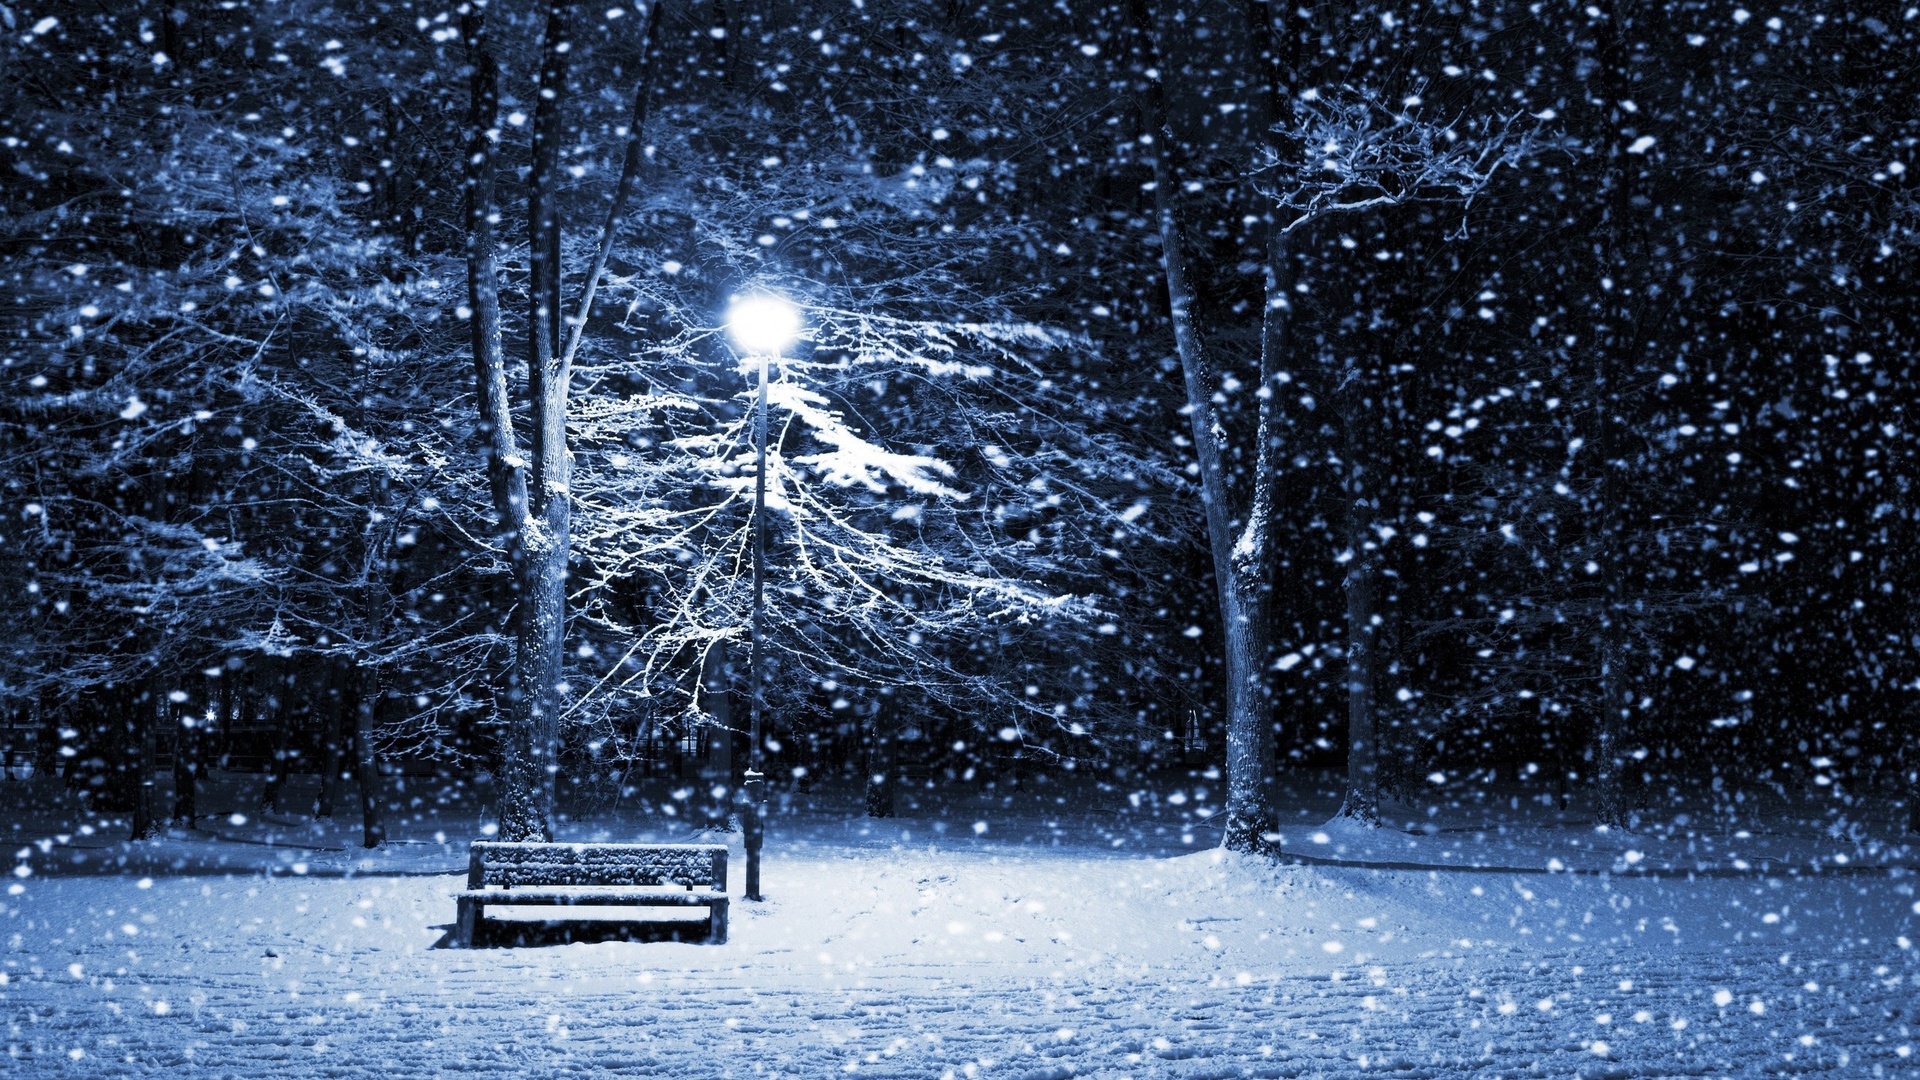 Nature Landscape Winter Snow Trees Forest Snowing Bench Night Lamp Street Light Empty 1920x1080